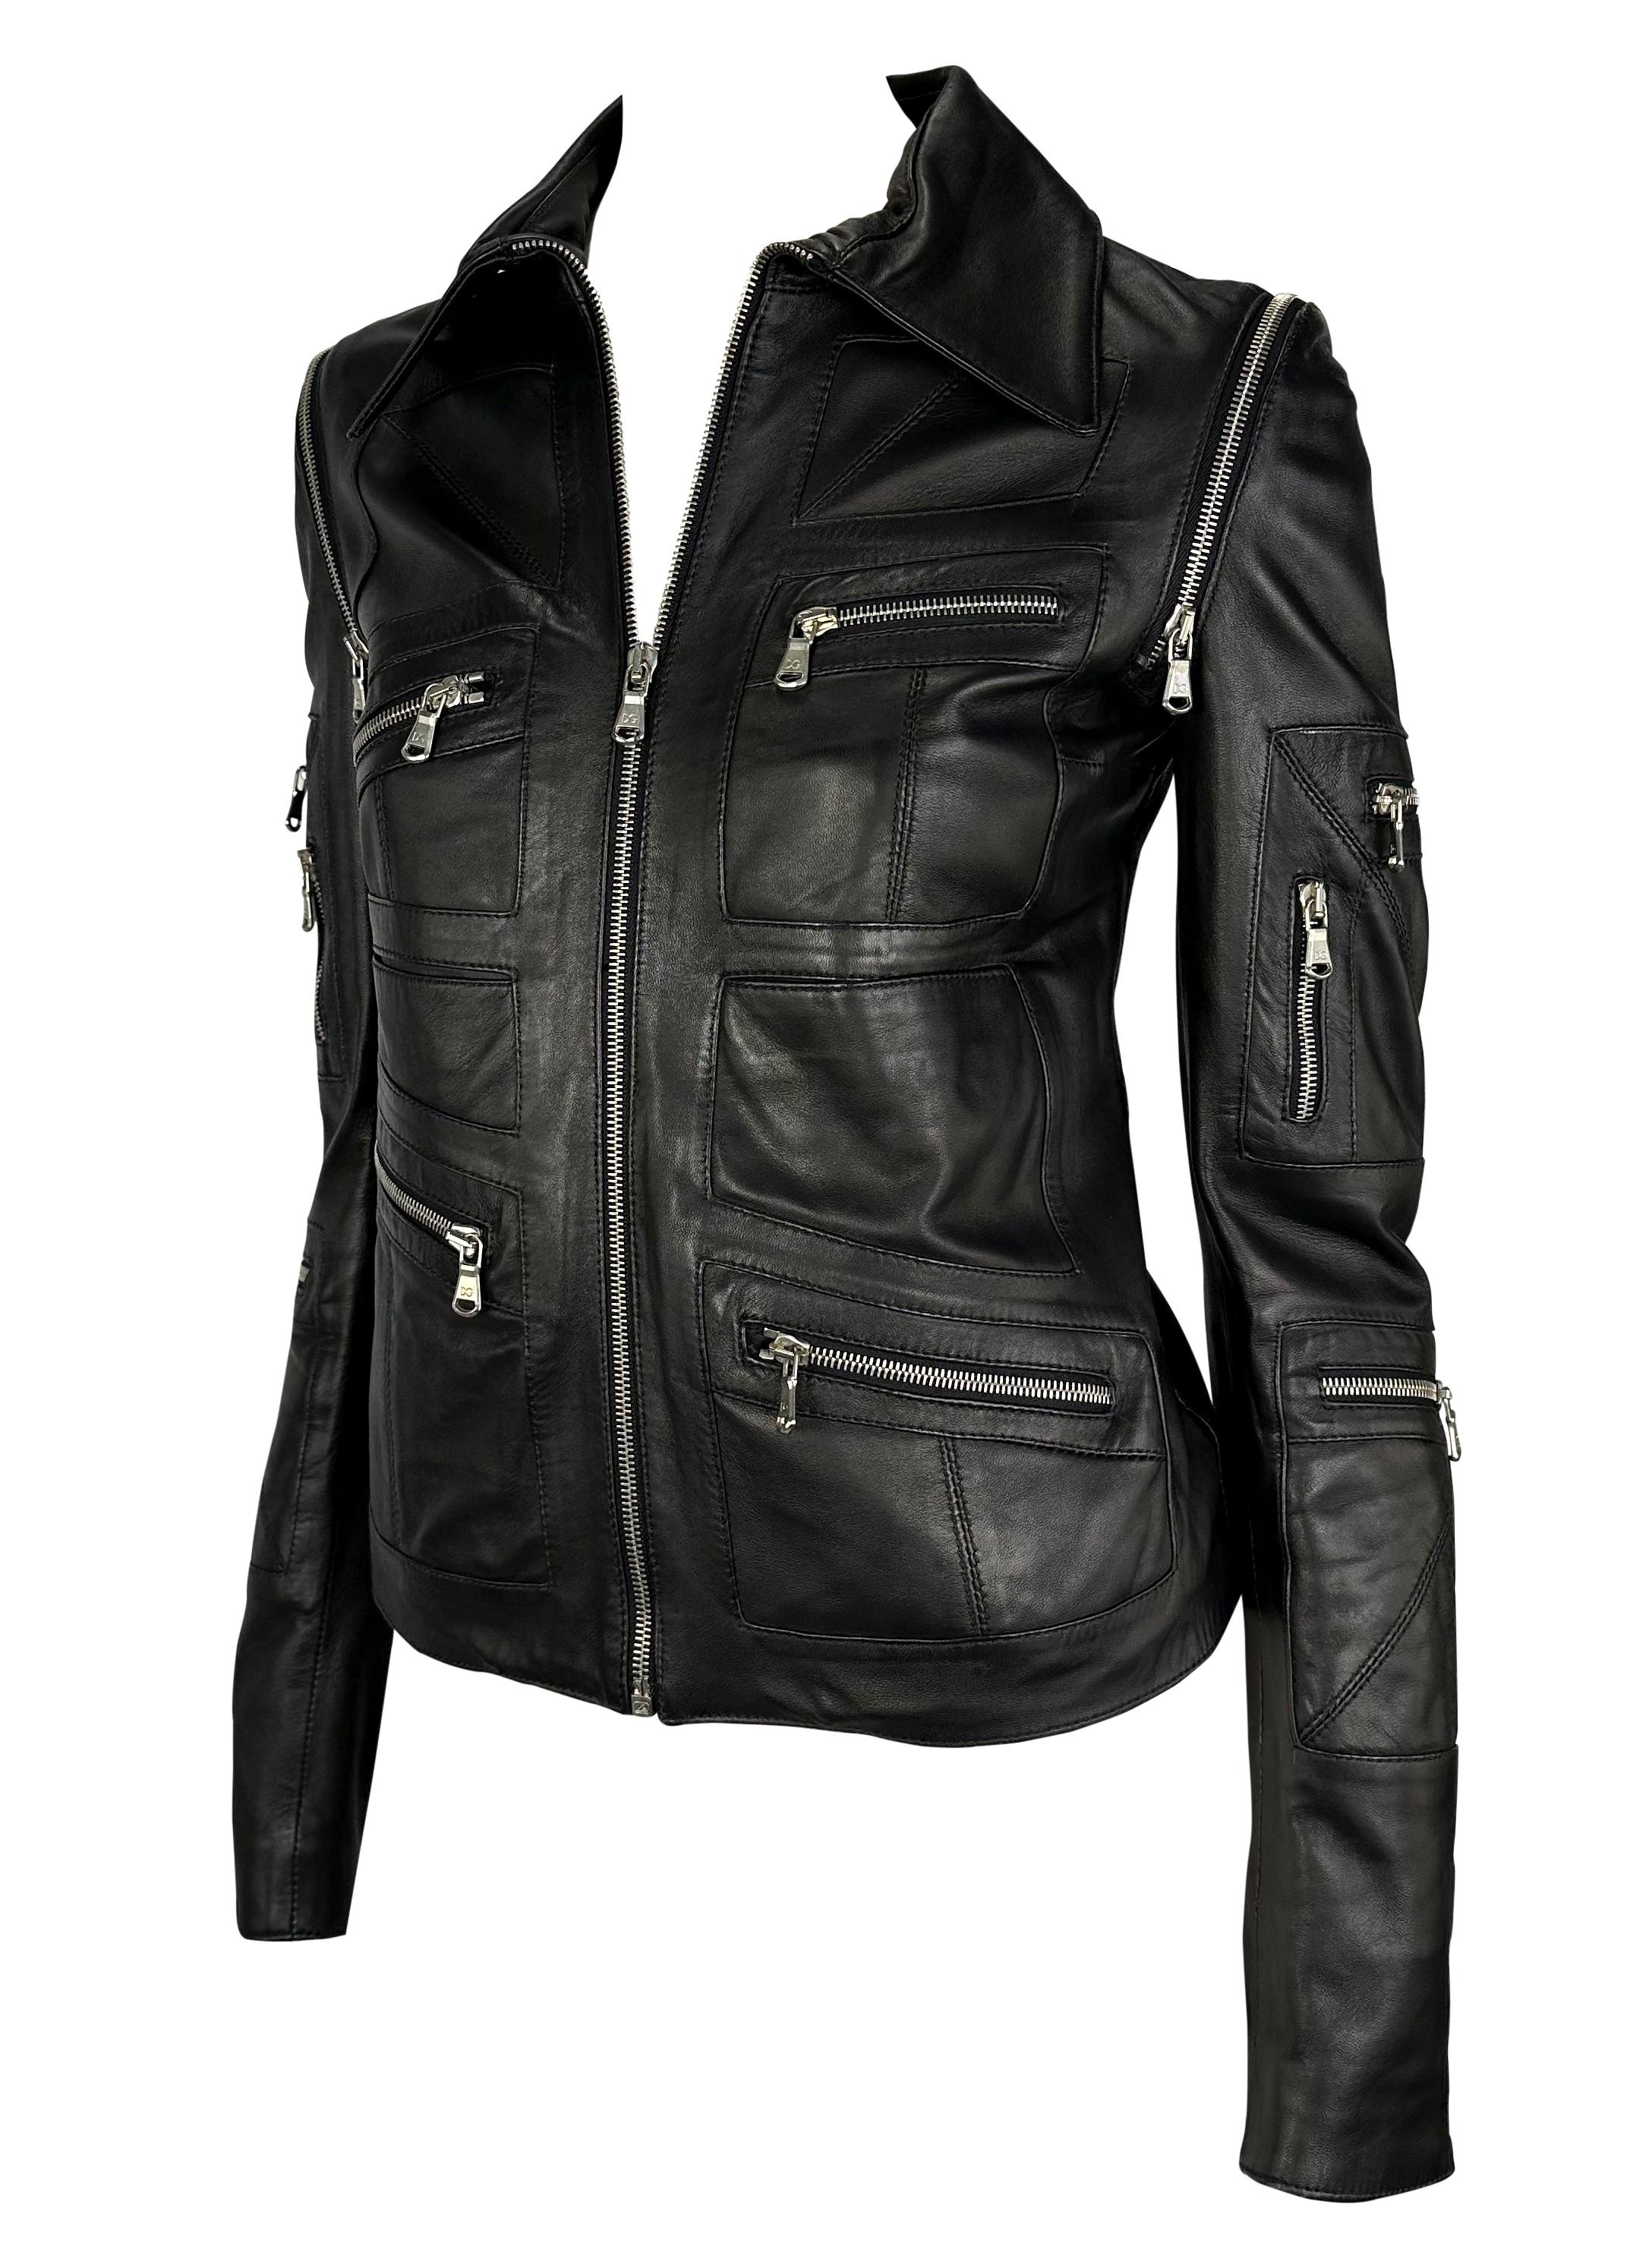 Presenting a fabulous black zipper Dolce and Gabbana leather moto jacket. From the early 2000s, this incredible jacket is covered in pockets and zippers. Every zipper on this biker chic jacket functions, including the zippers around the arms that